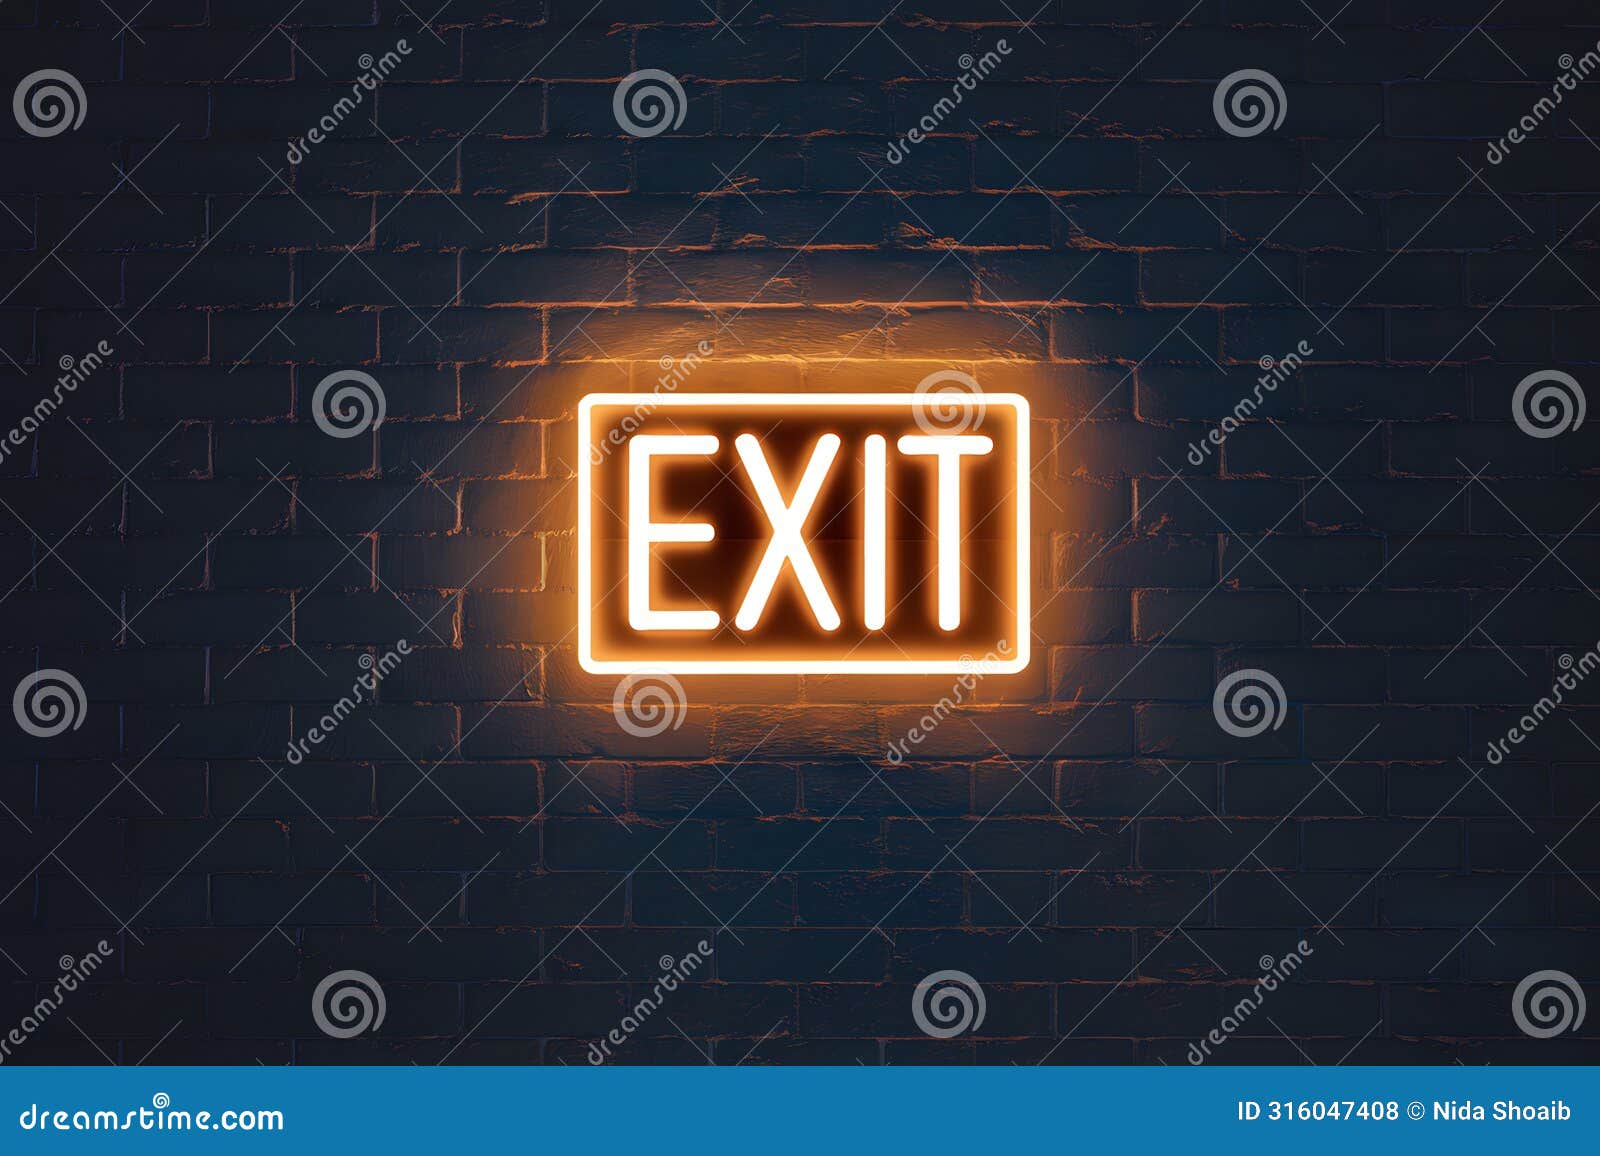 neon exit sign on dark brick wall creates stark contrast, guides way out